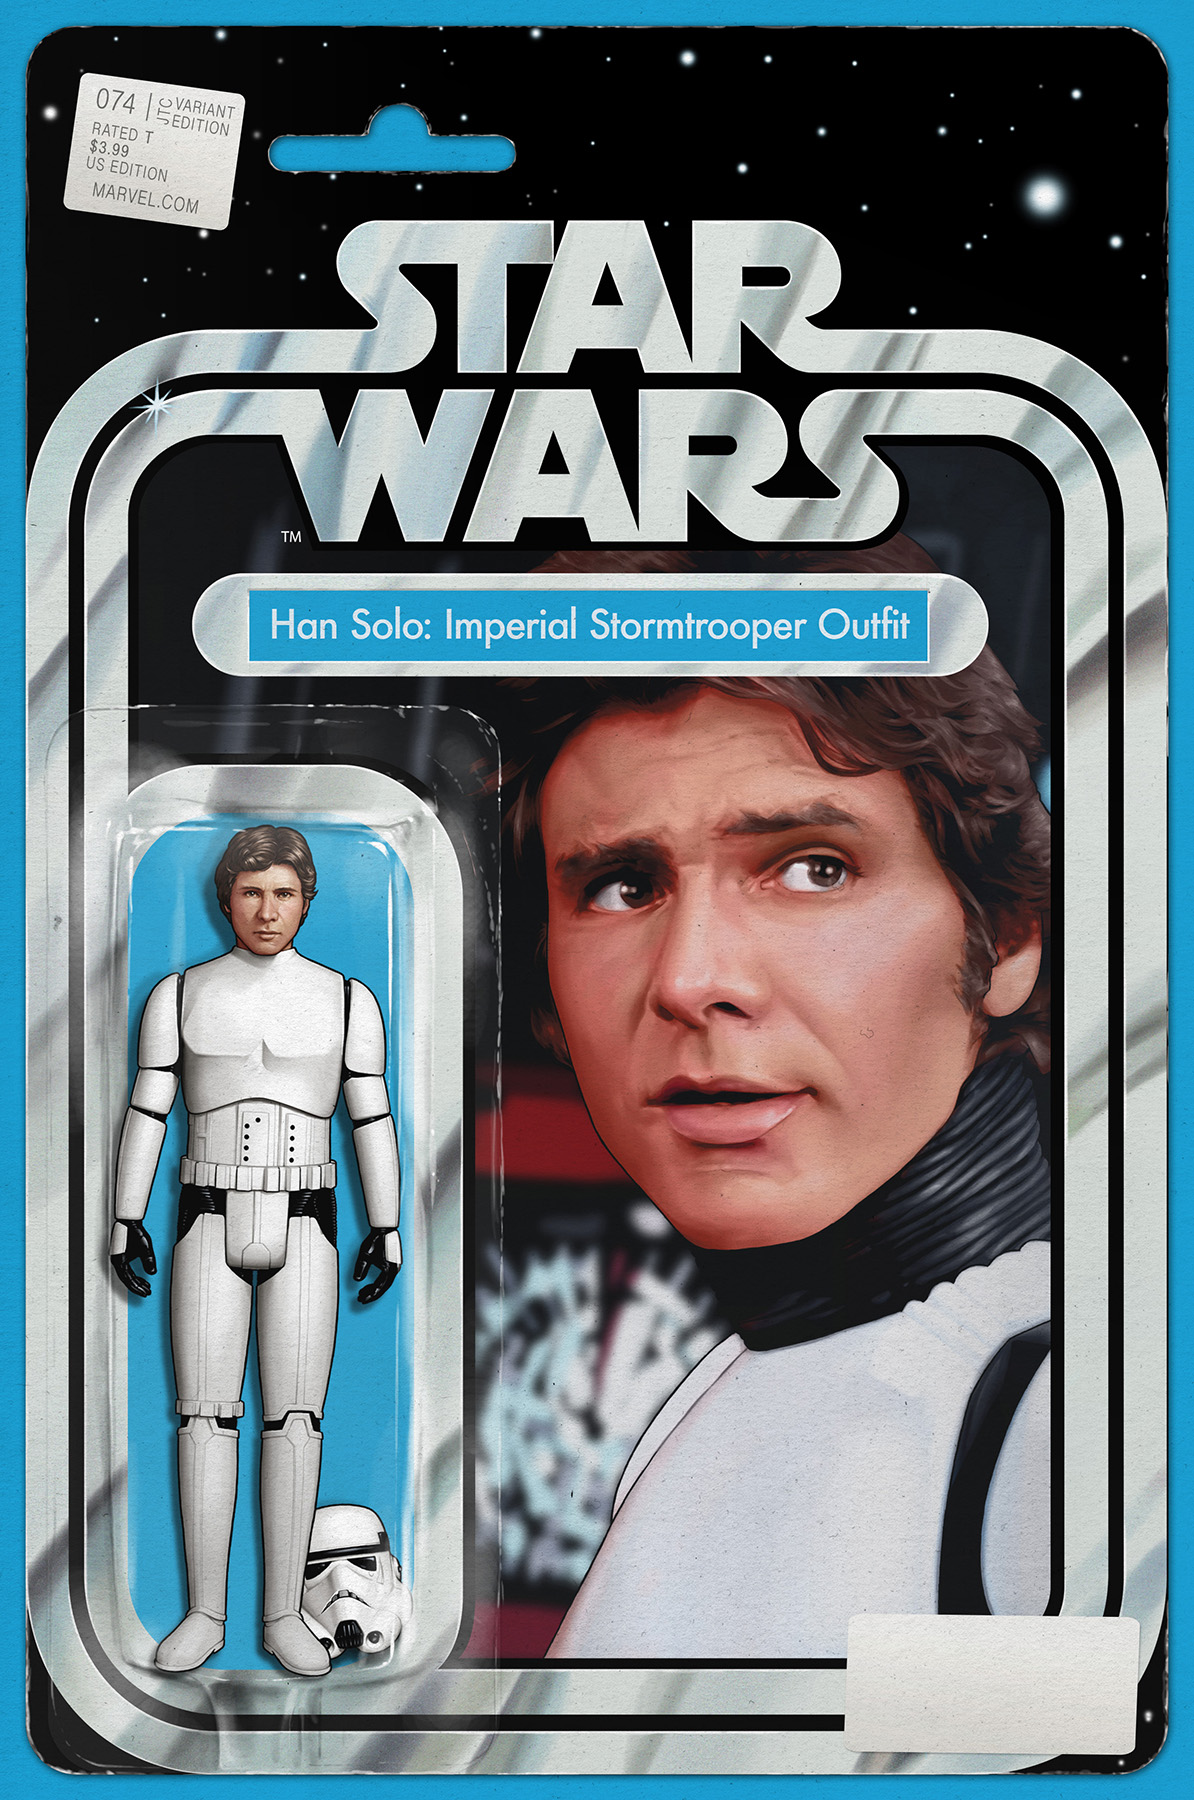 Star Wars #74 (JTC "Han Solo: Imperial Stormtrooper Outfit" Action Figure Variant Cover) (12.03.2020)